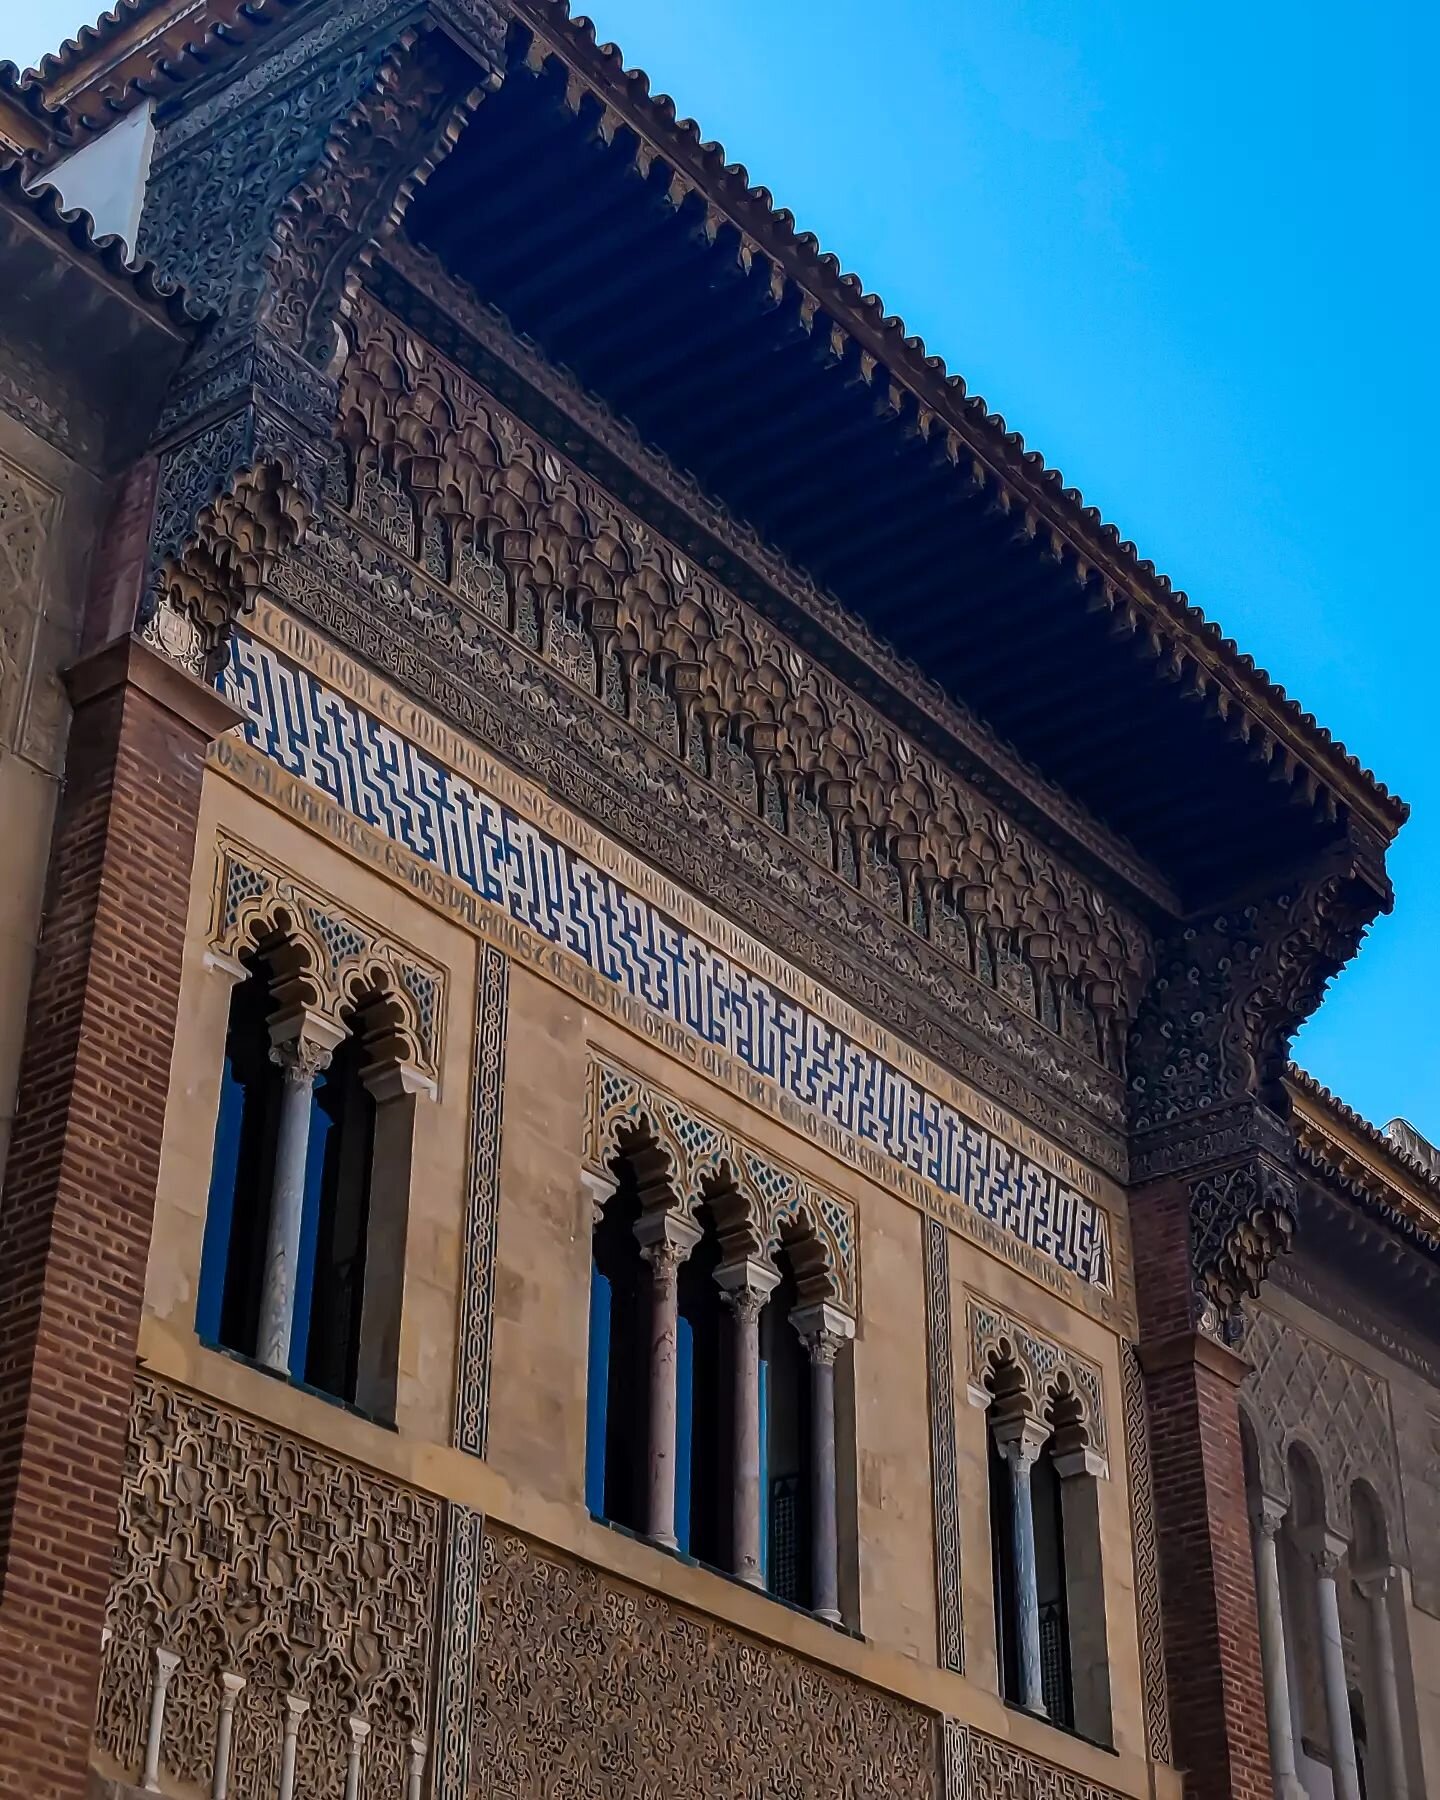 Reminiscing the stunning beauty of Seville Alcazar 🏰 The intricate details of the palace, inspired by the Moors, the lush gardens, and the rich history behind its walls make it a truly magnificent place to visit. It's no wonder why it's considered o